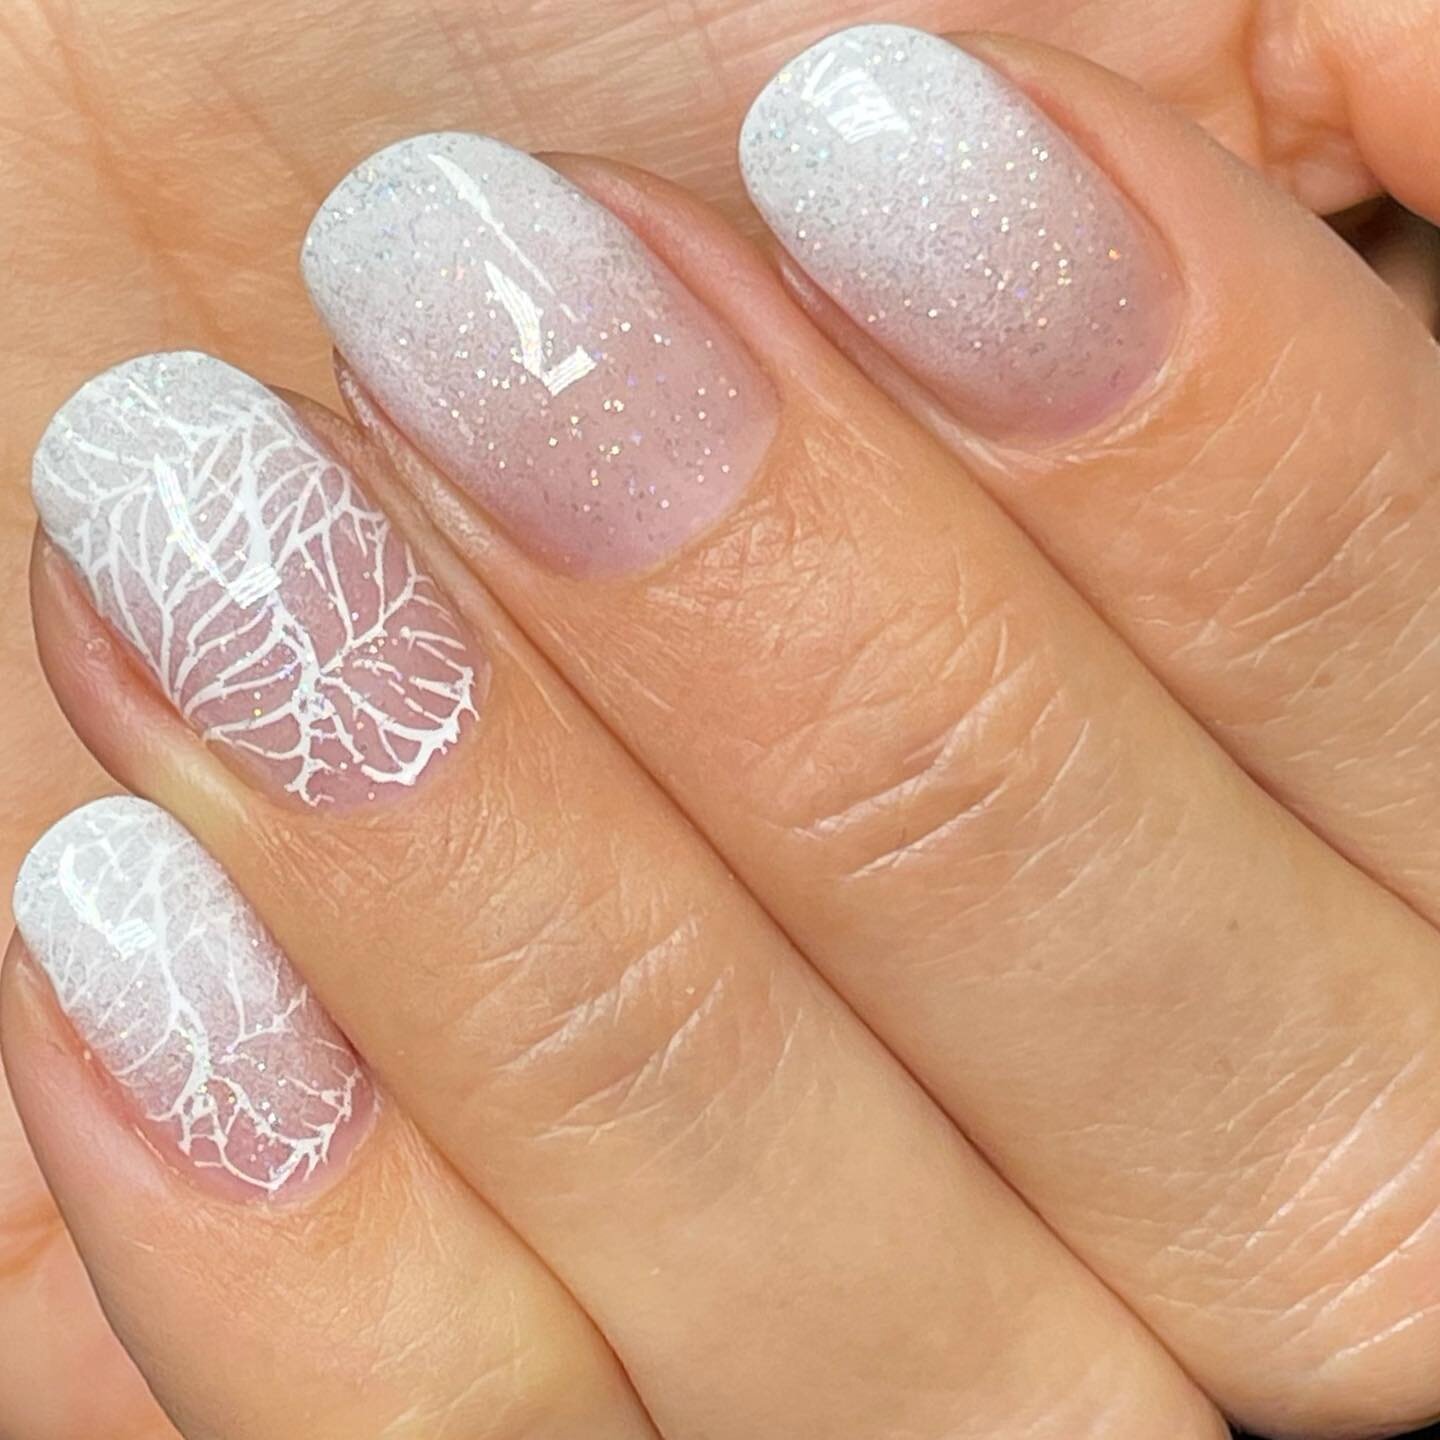 A variety of techniques were used in this design 💅🏻 Gel application on natural nails. Next refill in 6 weeks time. Work completed by Jolanta 📞0410 876 850